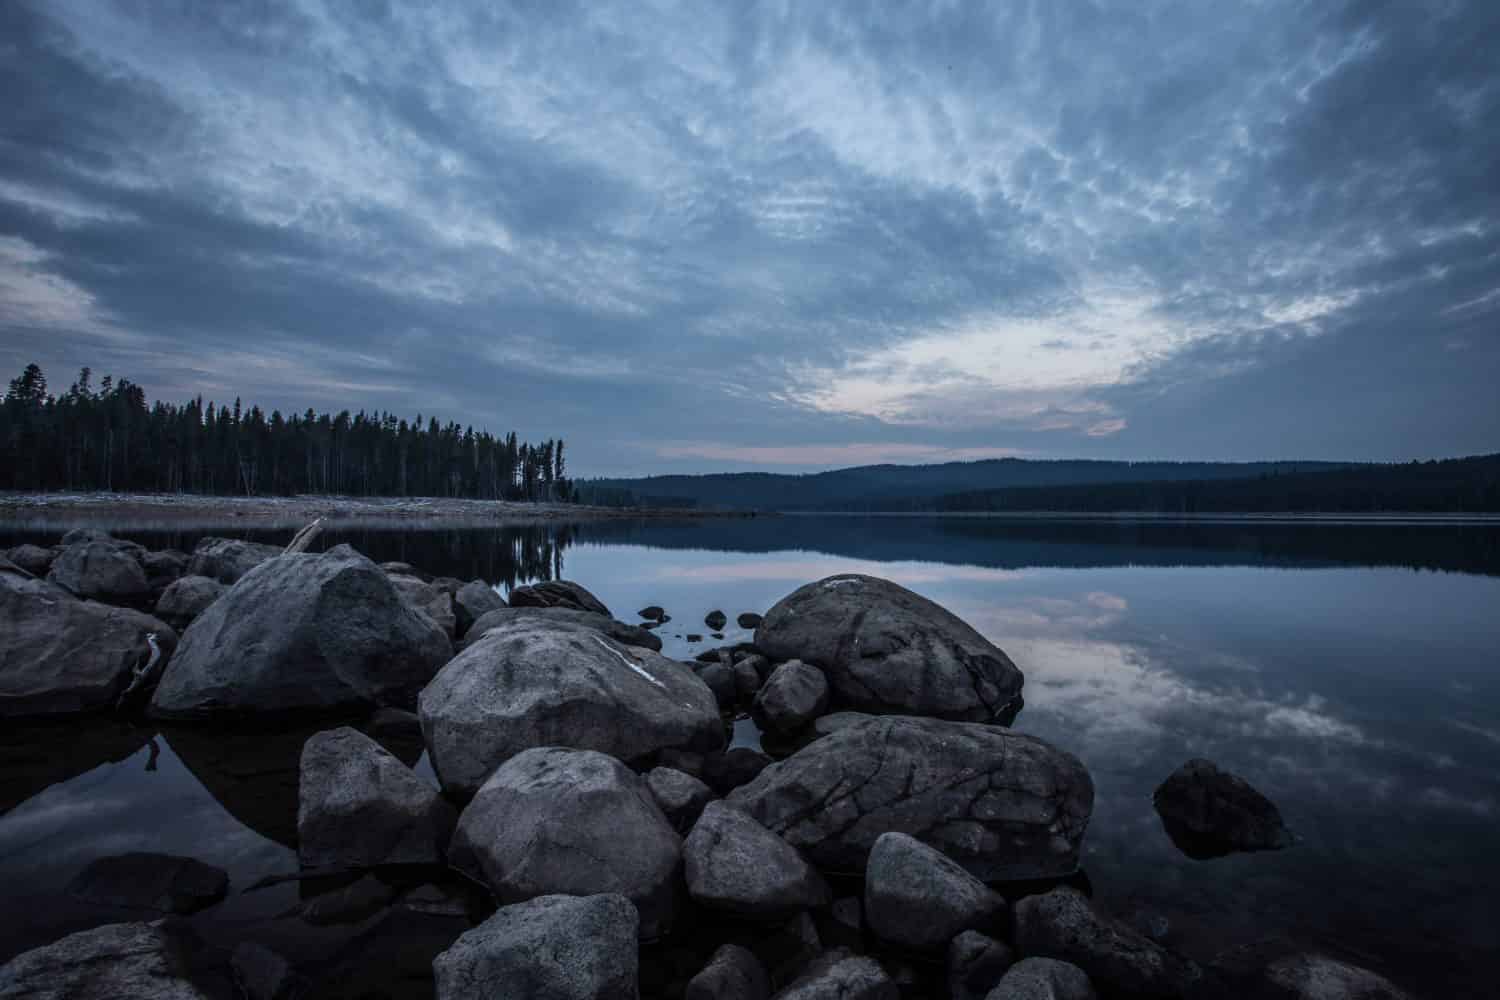 Just before dawn over Fourmile Lake, OR